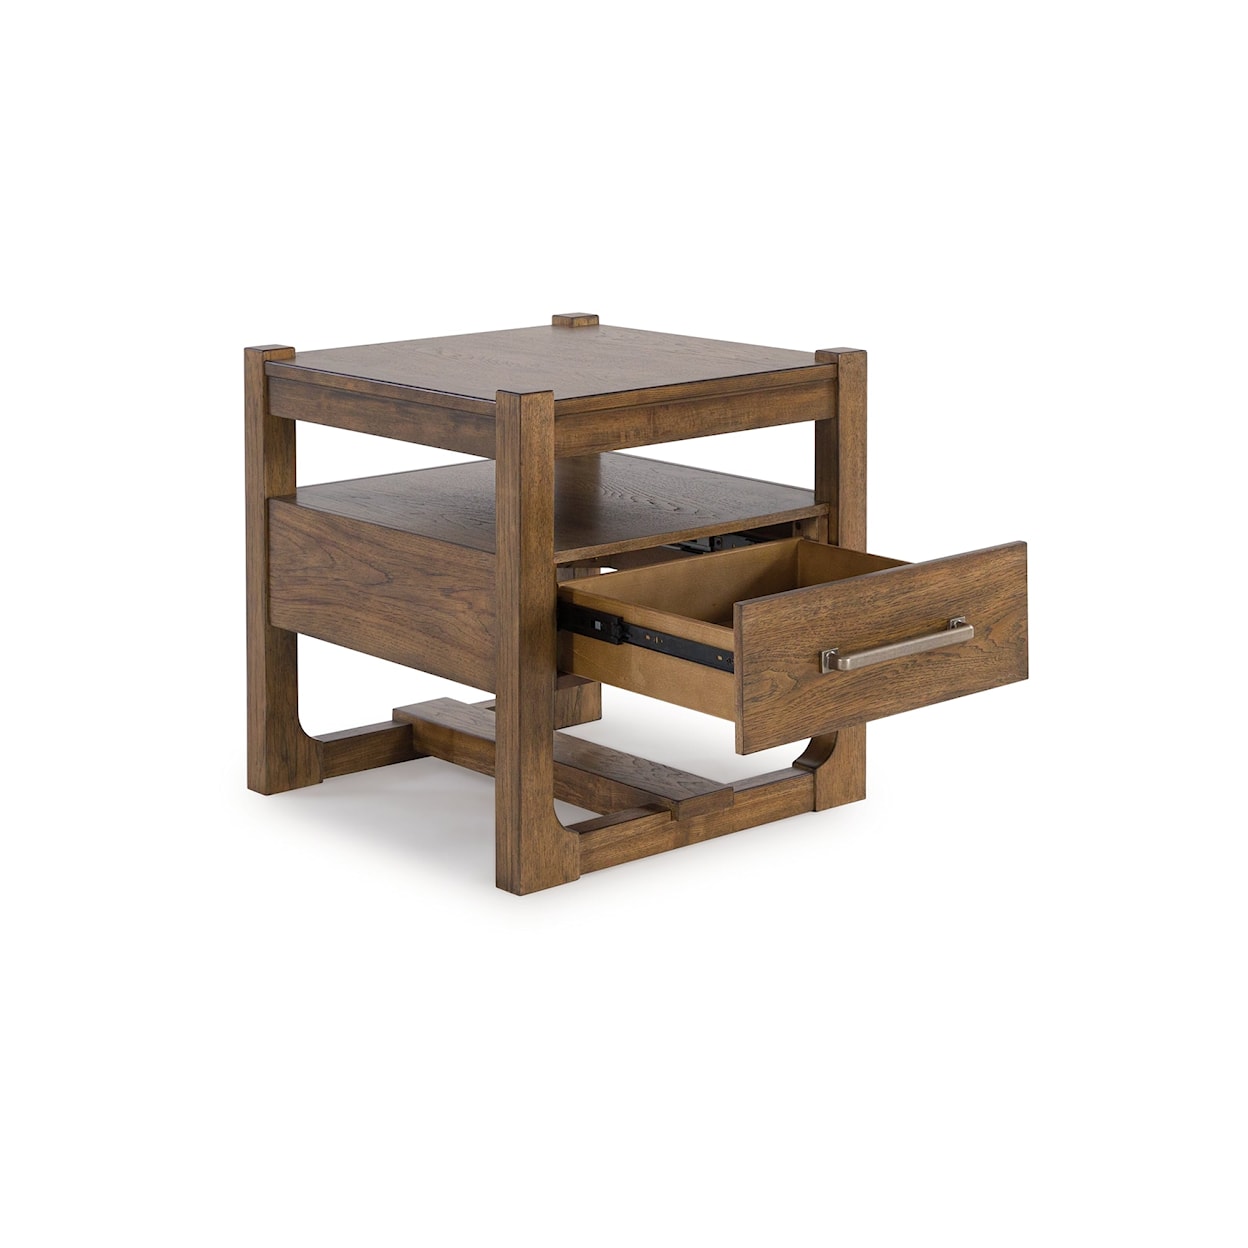 Benchcraft Cabalynn Square End Table